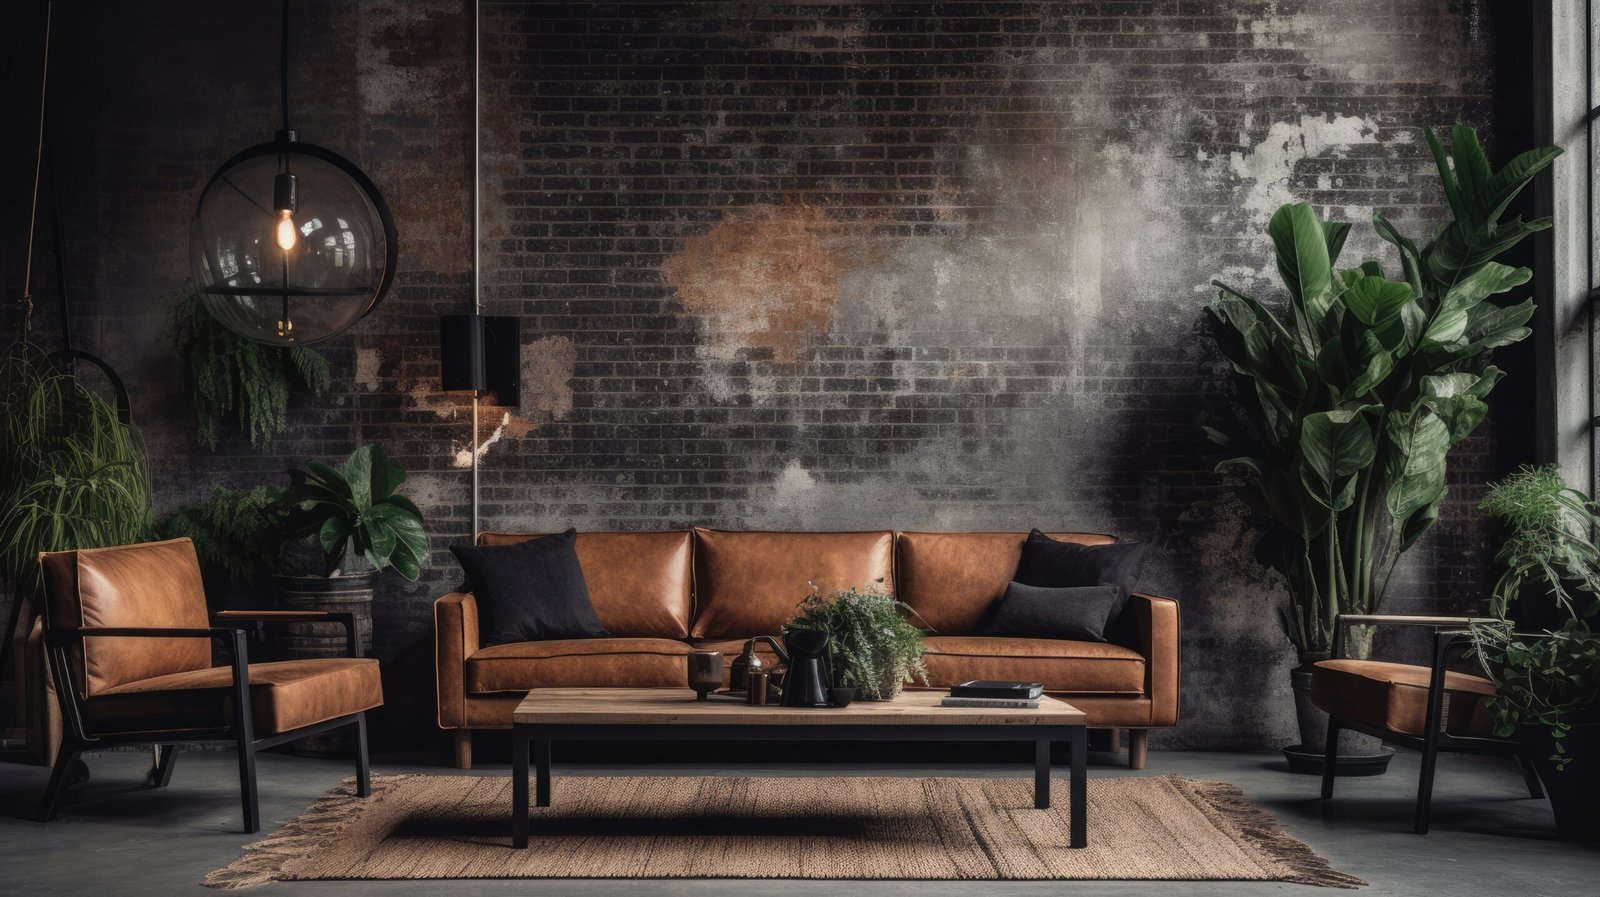 Inspiring industrial interior design with exposed bricks and a brown couch. 